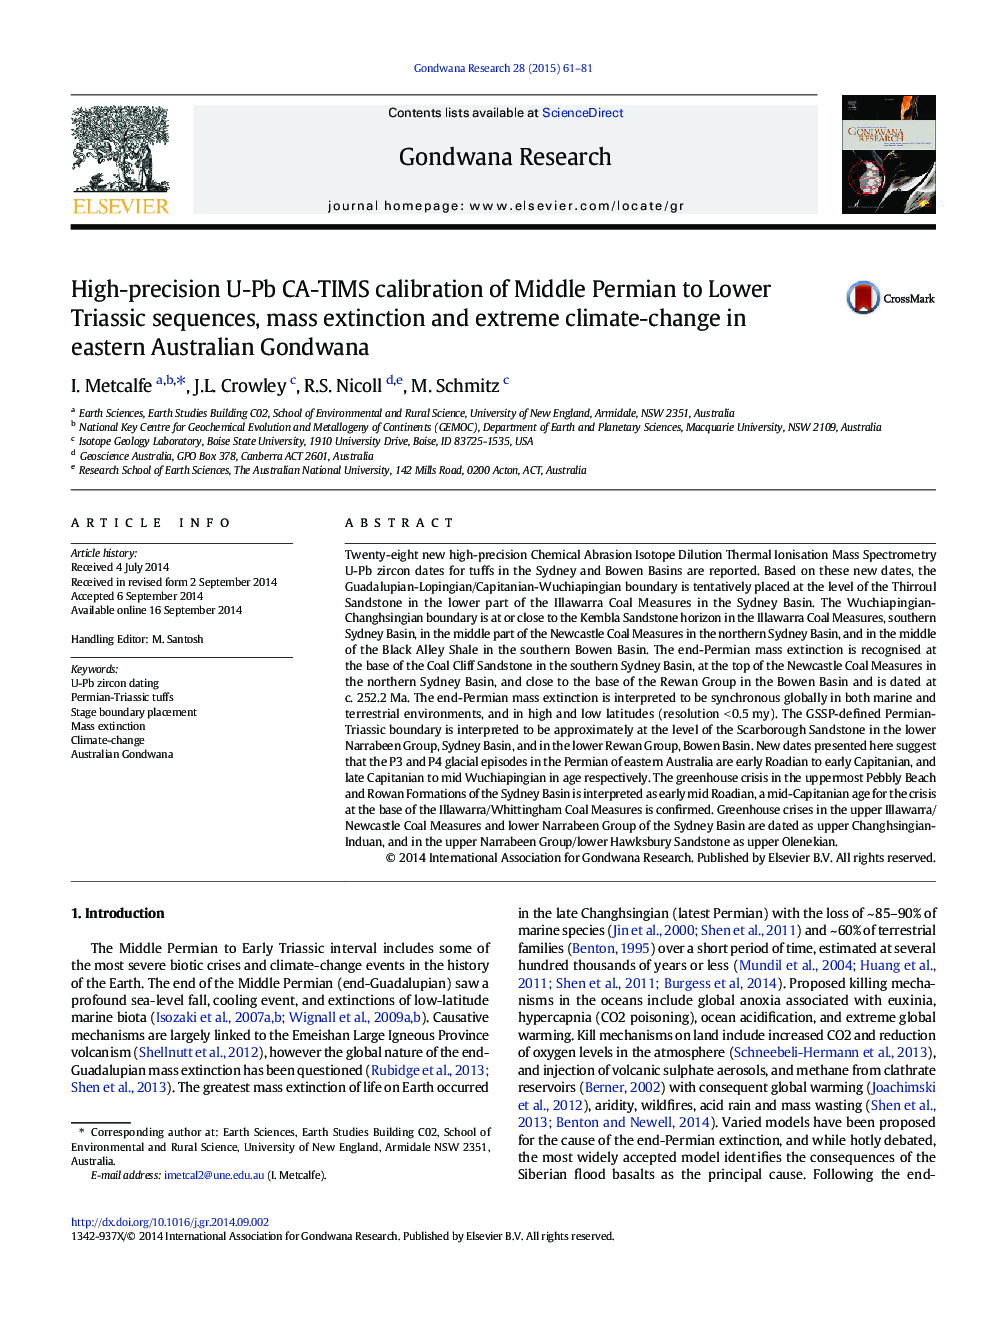 High-precision U-Pb CA-TIMS calibration of Middle Permian to Lower Triassic sequences, mass extinction and extreme climate-change in eastern Australian Gondwana